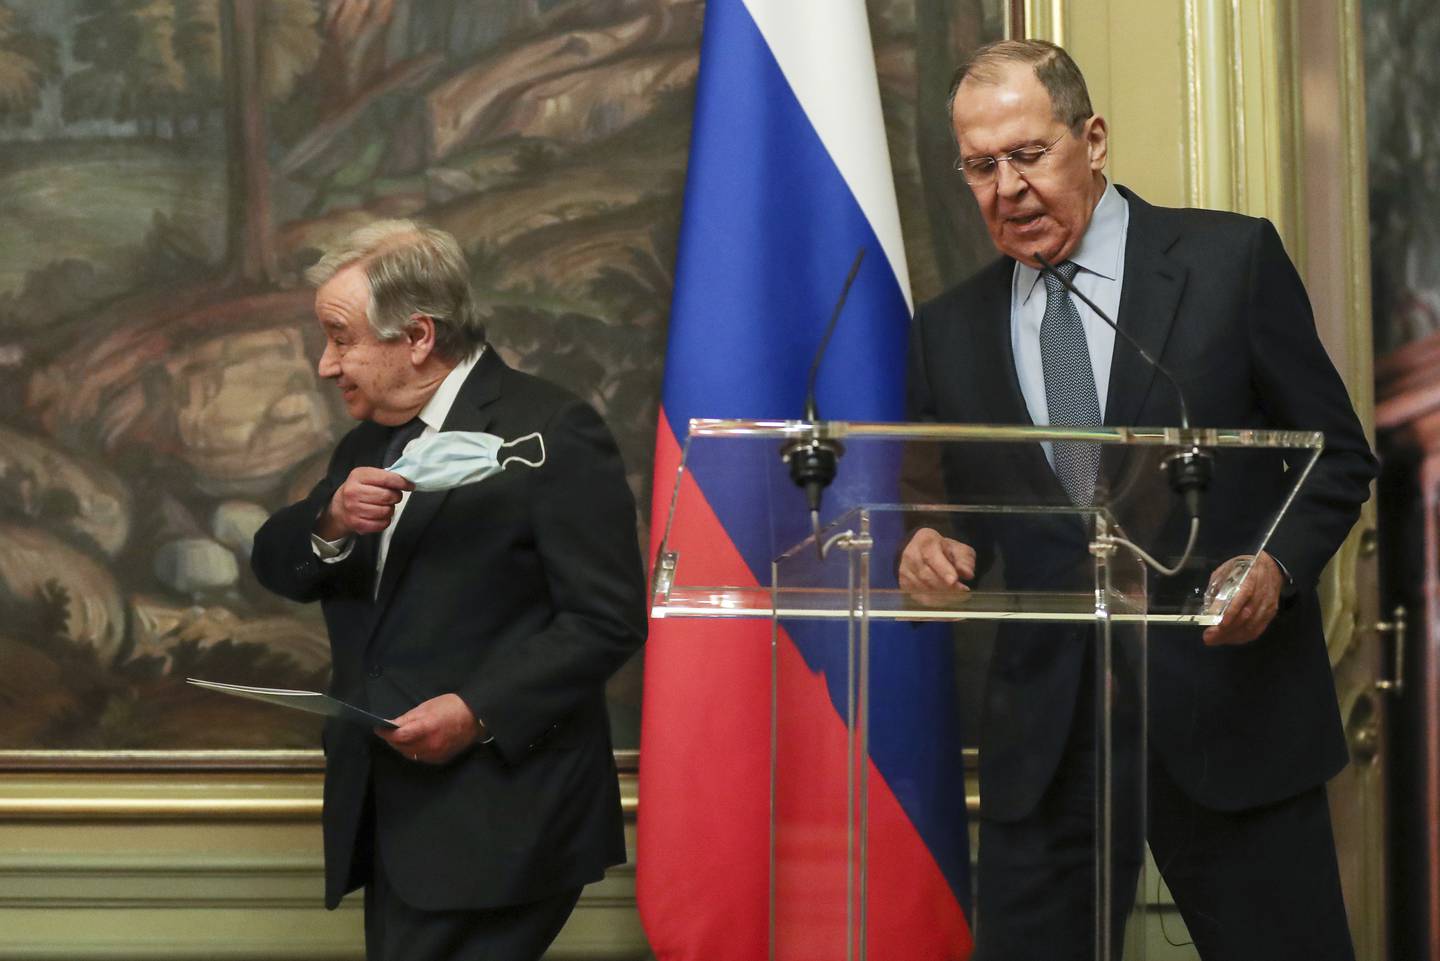 Russian Foreign Minister Sergey Lavrov, right, and UN Secretary-General Antonio Guterres met on Tuesday. AP